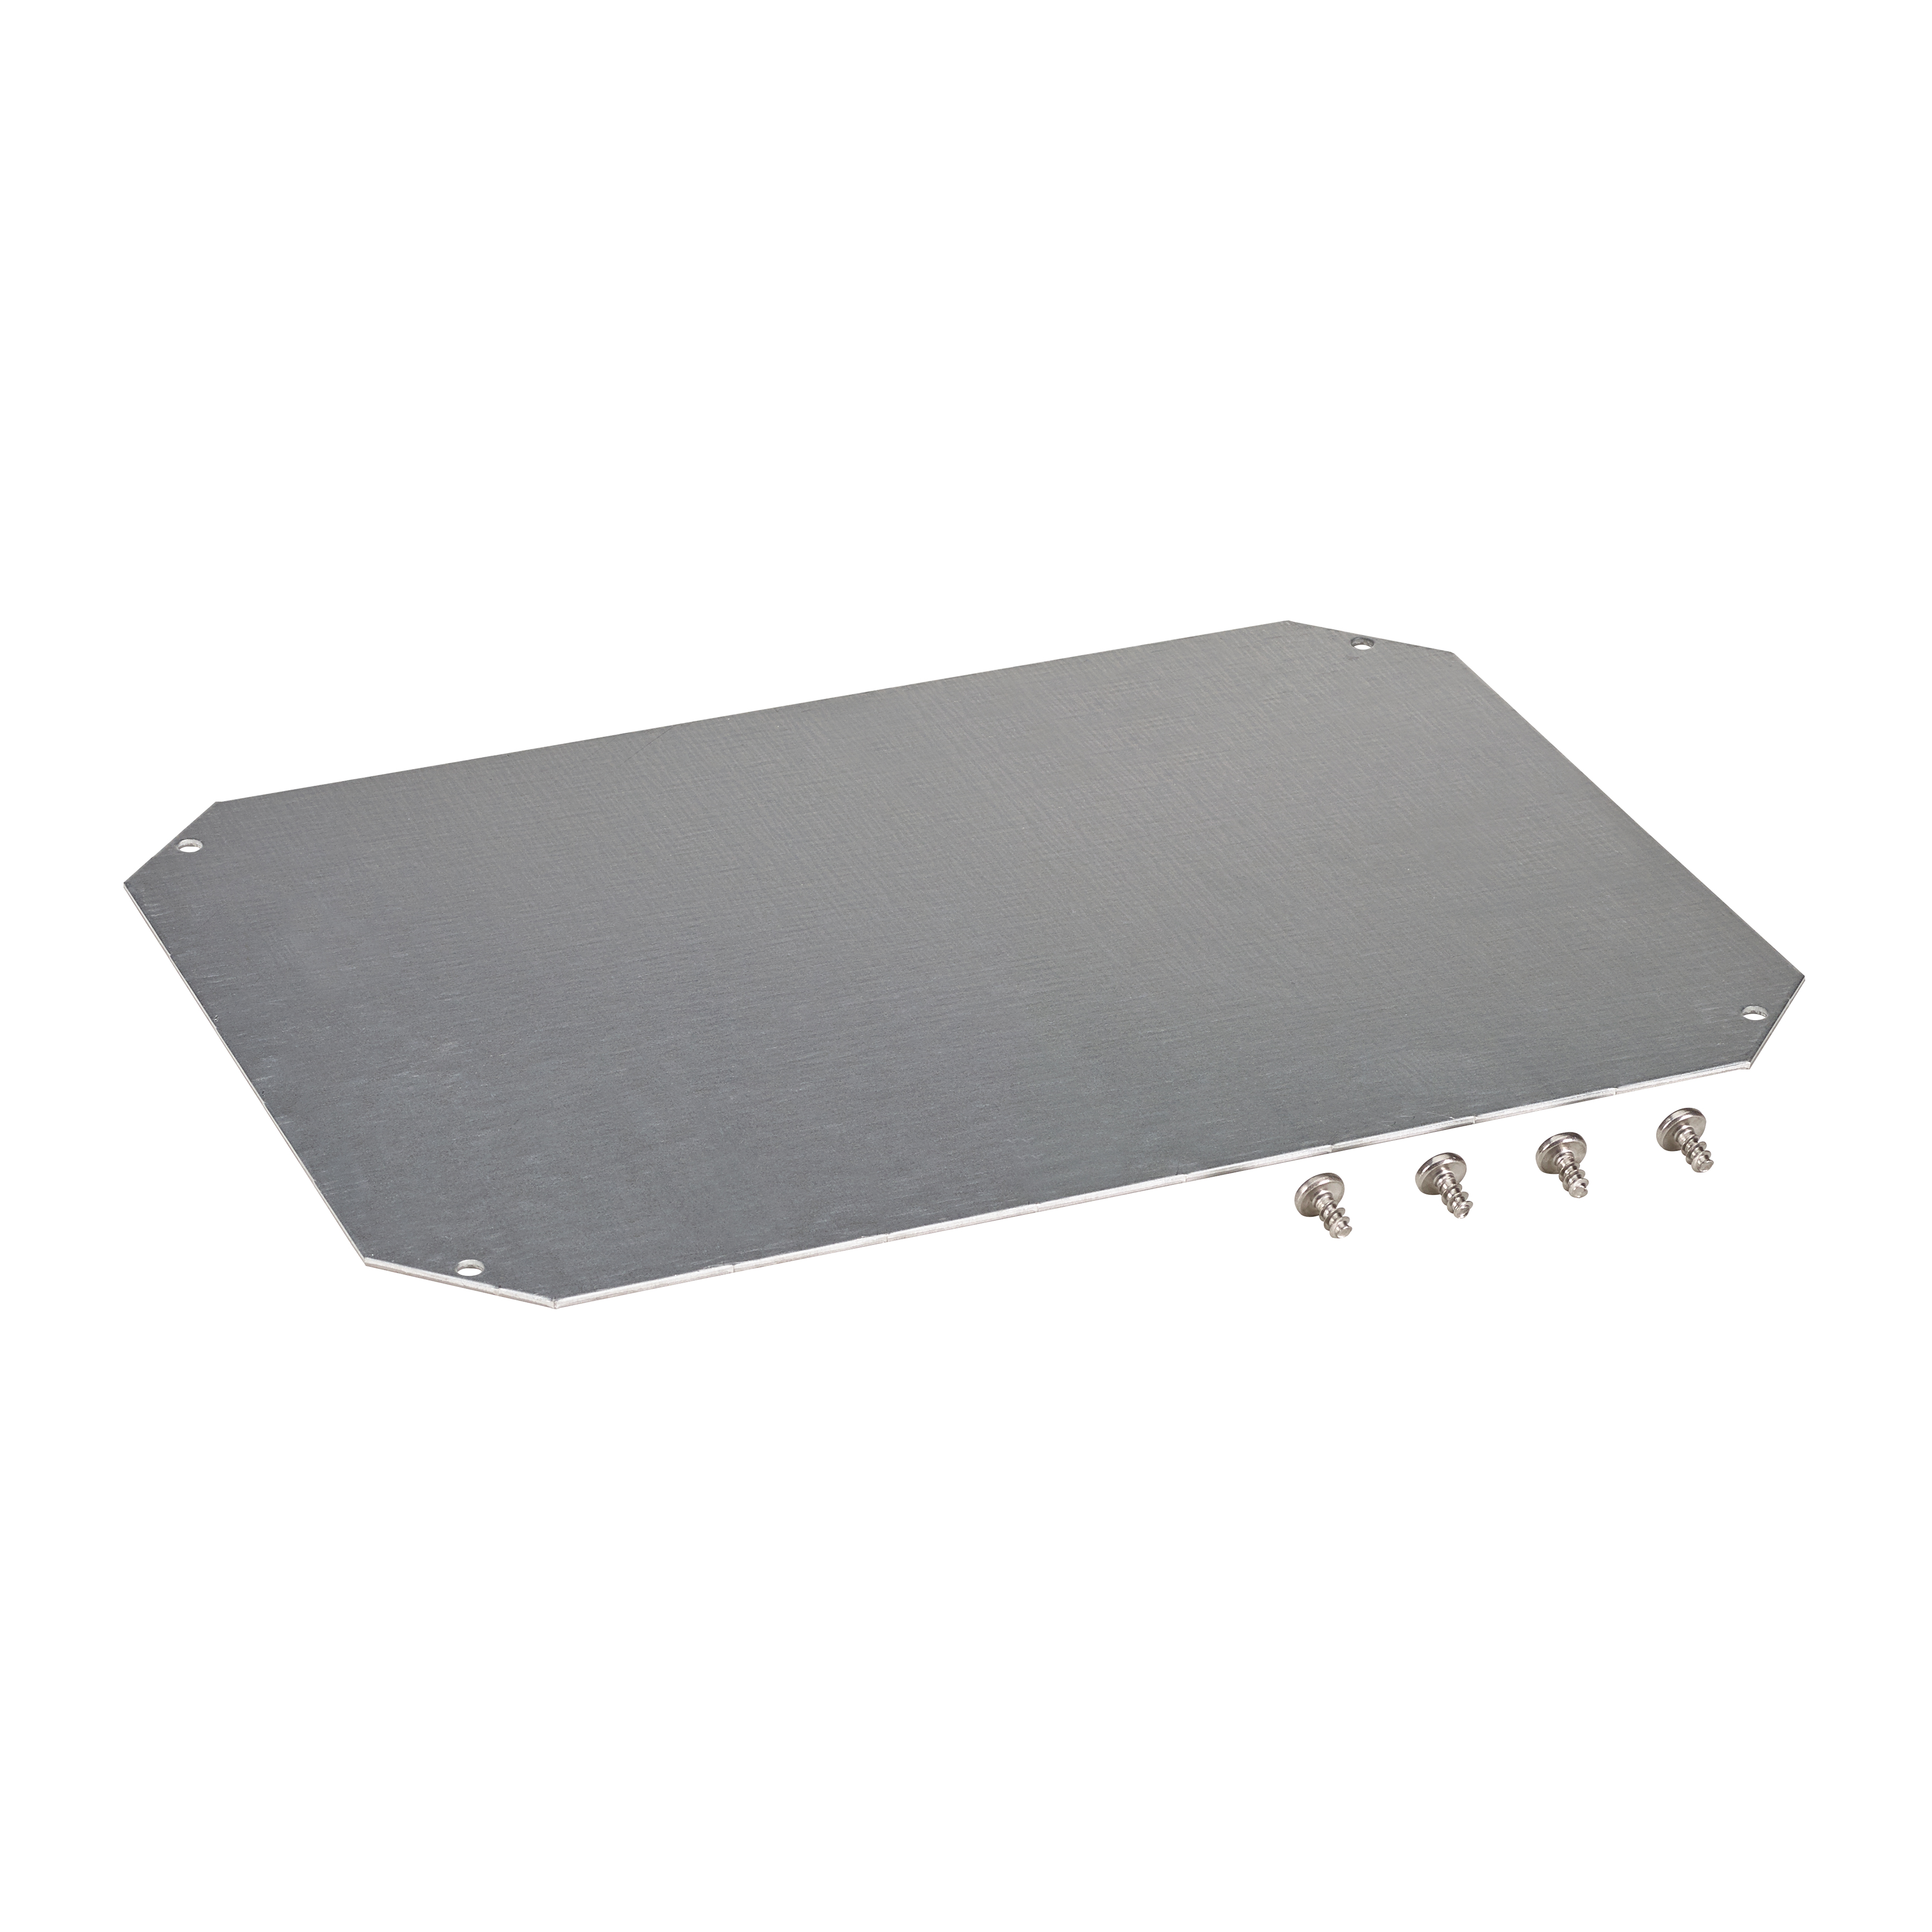 MPMP ARCA 7050 Mounting plate multiperforated